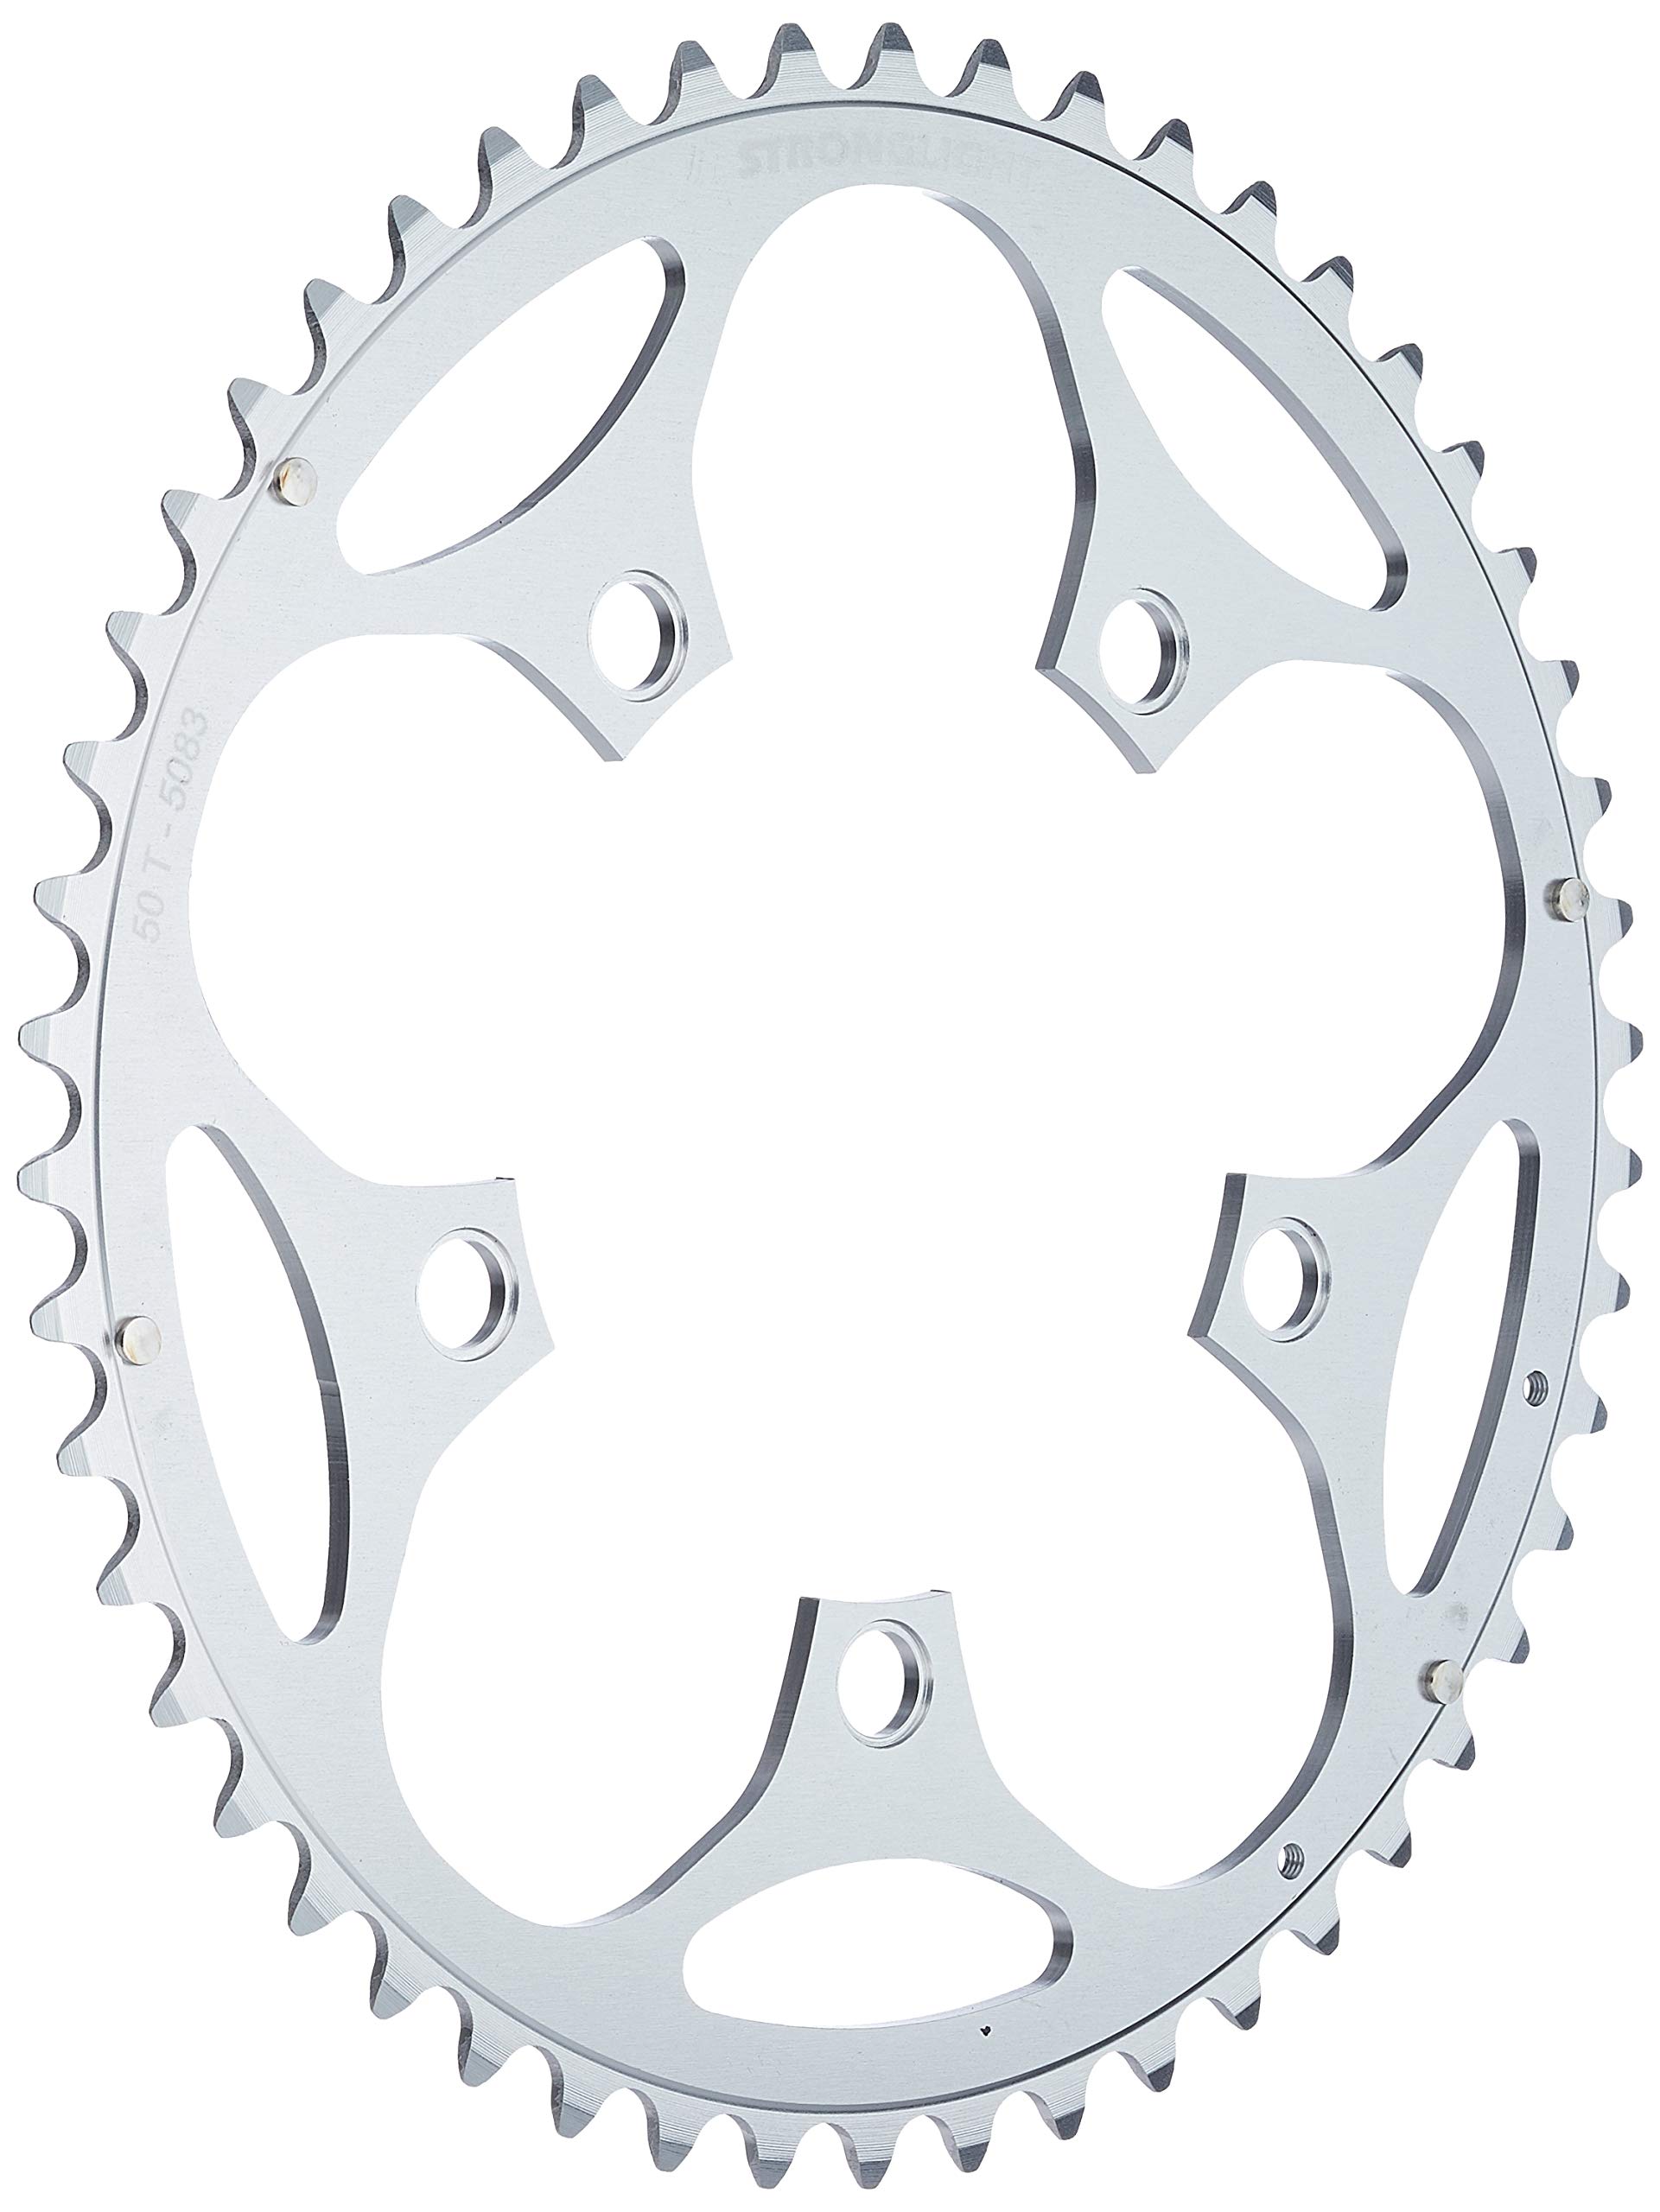 34T 5-Arm 110mm Chainring Silver Stronglight